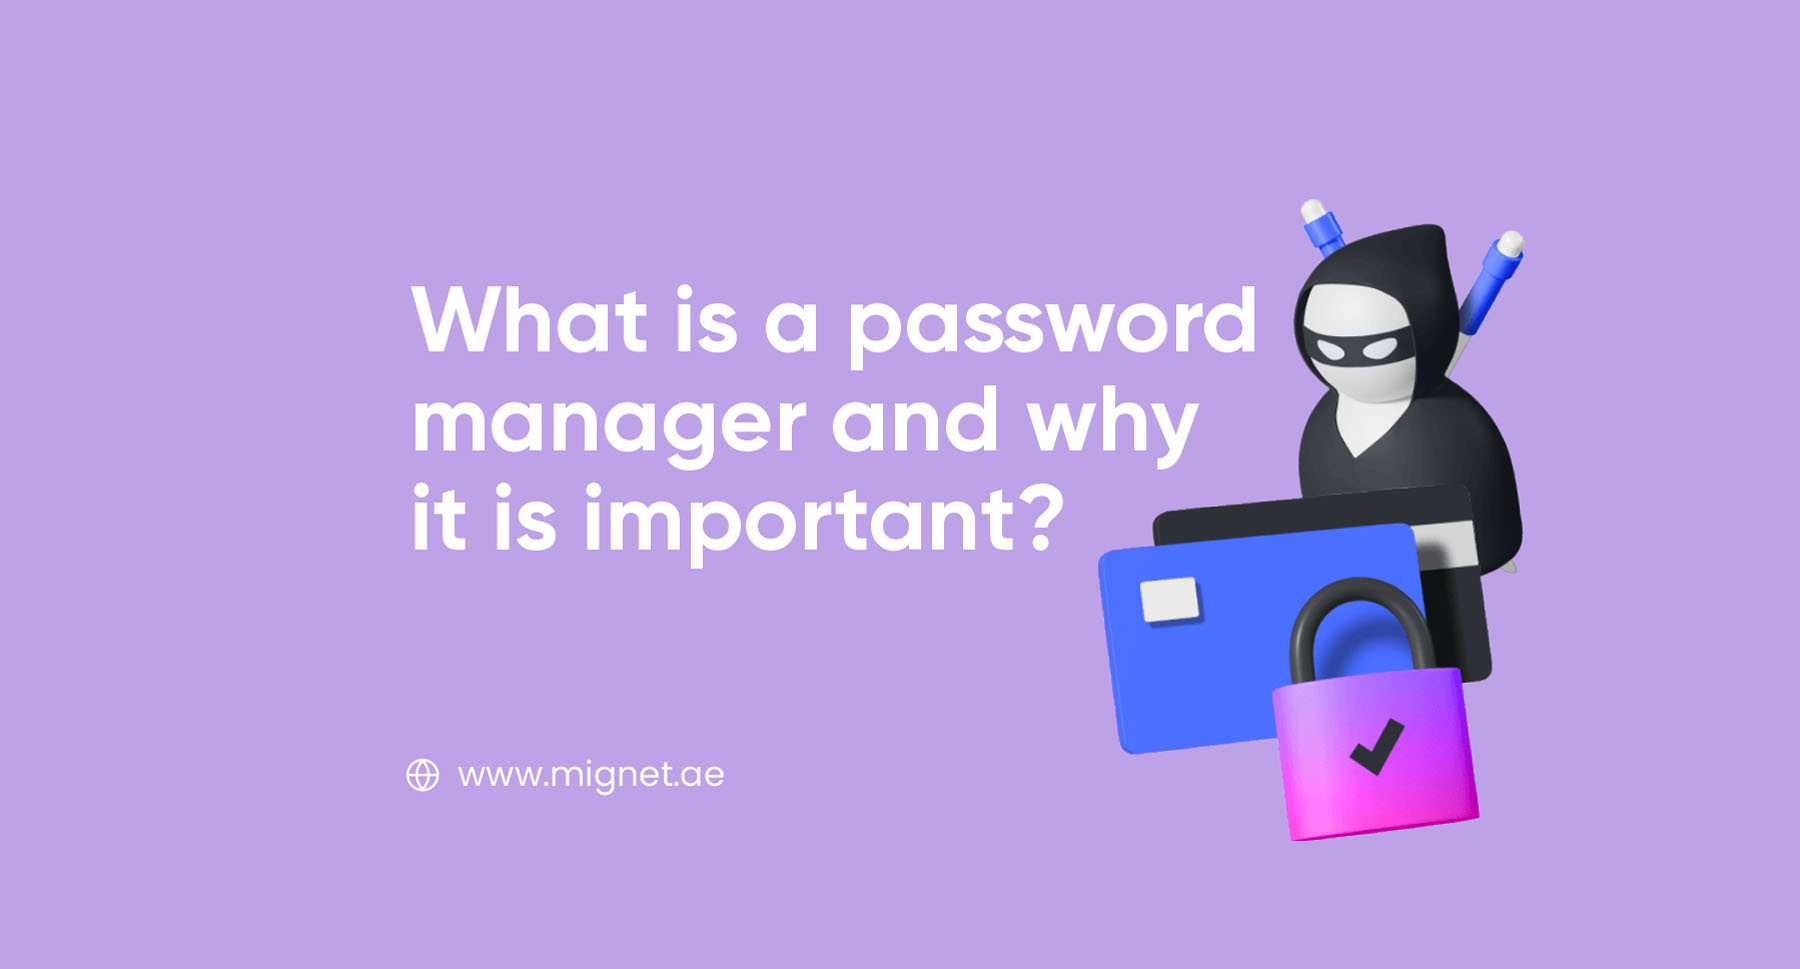 What is a password manager and why it is important?